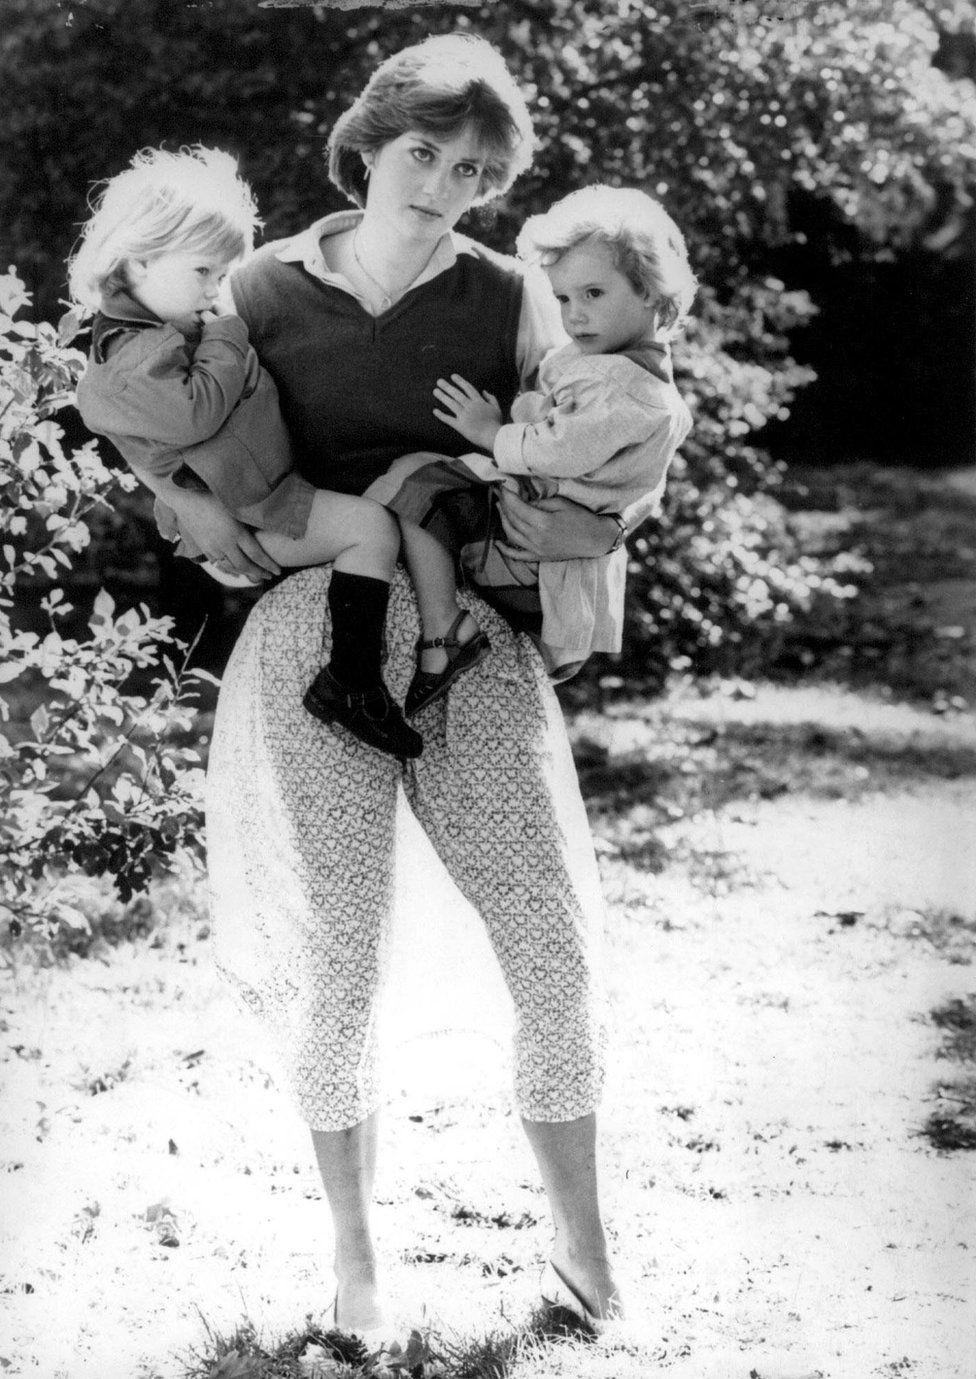 Diana holds two children as the sun shines through her skirt.